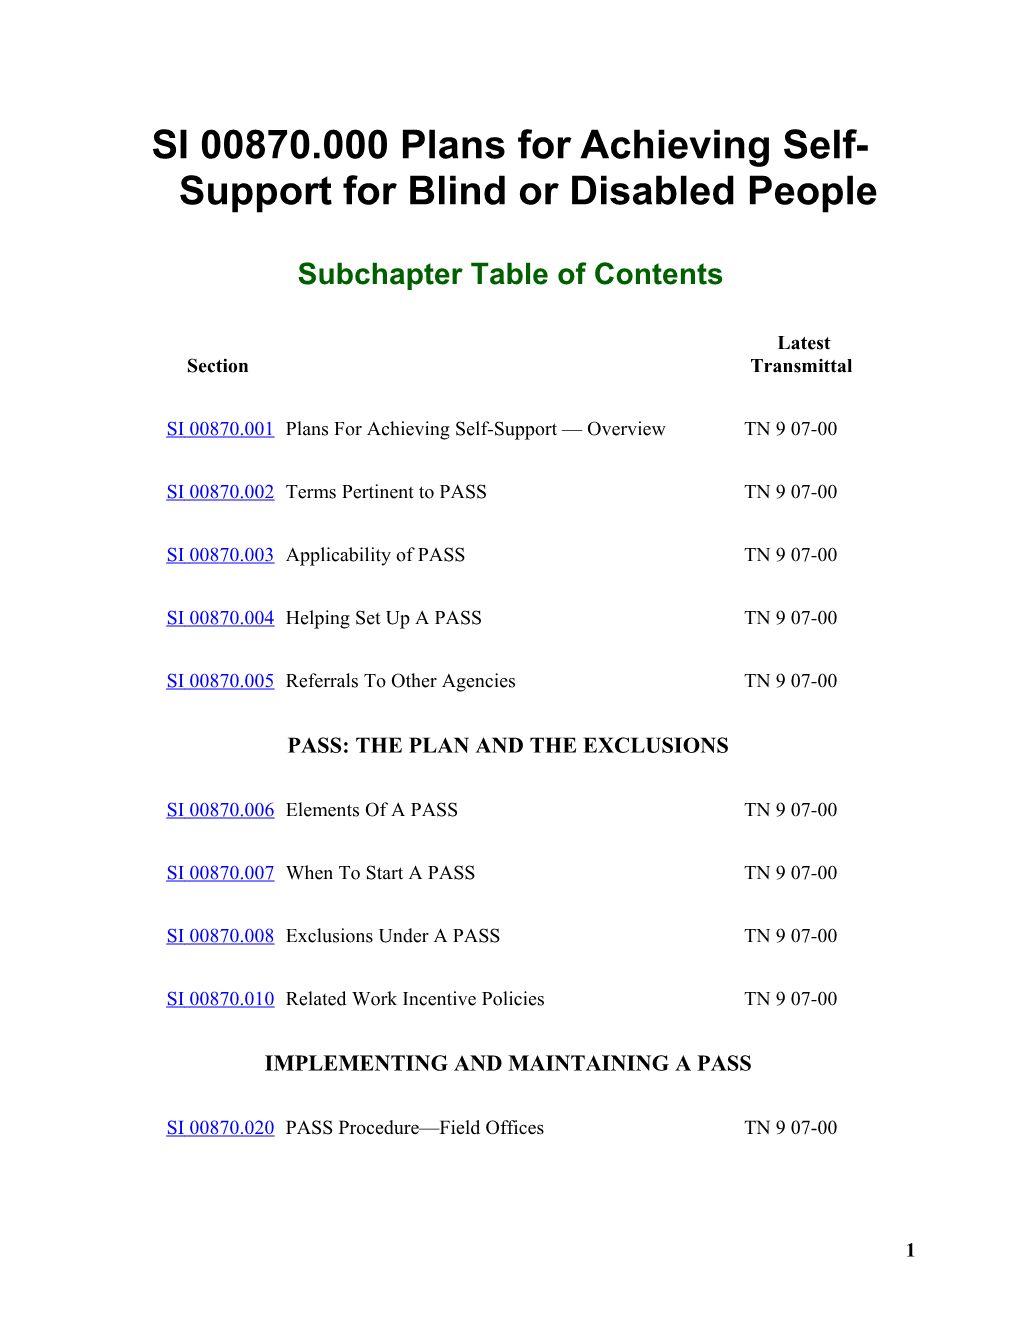 SI 00870.000 Plans for Achieving Self-Support for Blind Or Disabled People